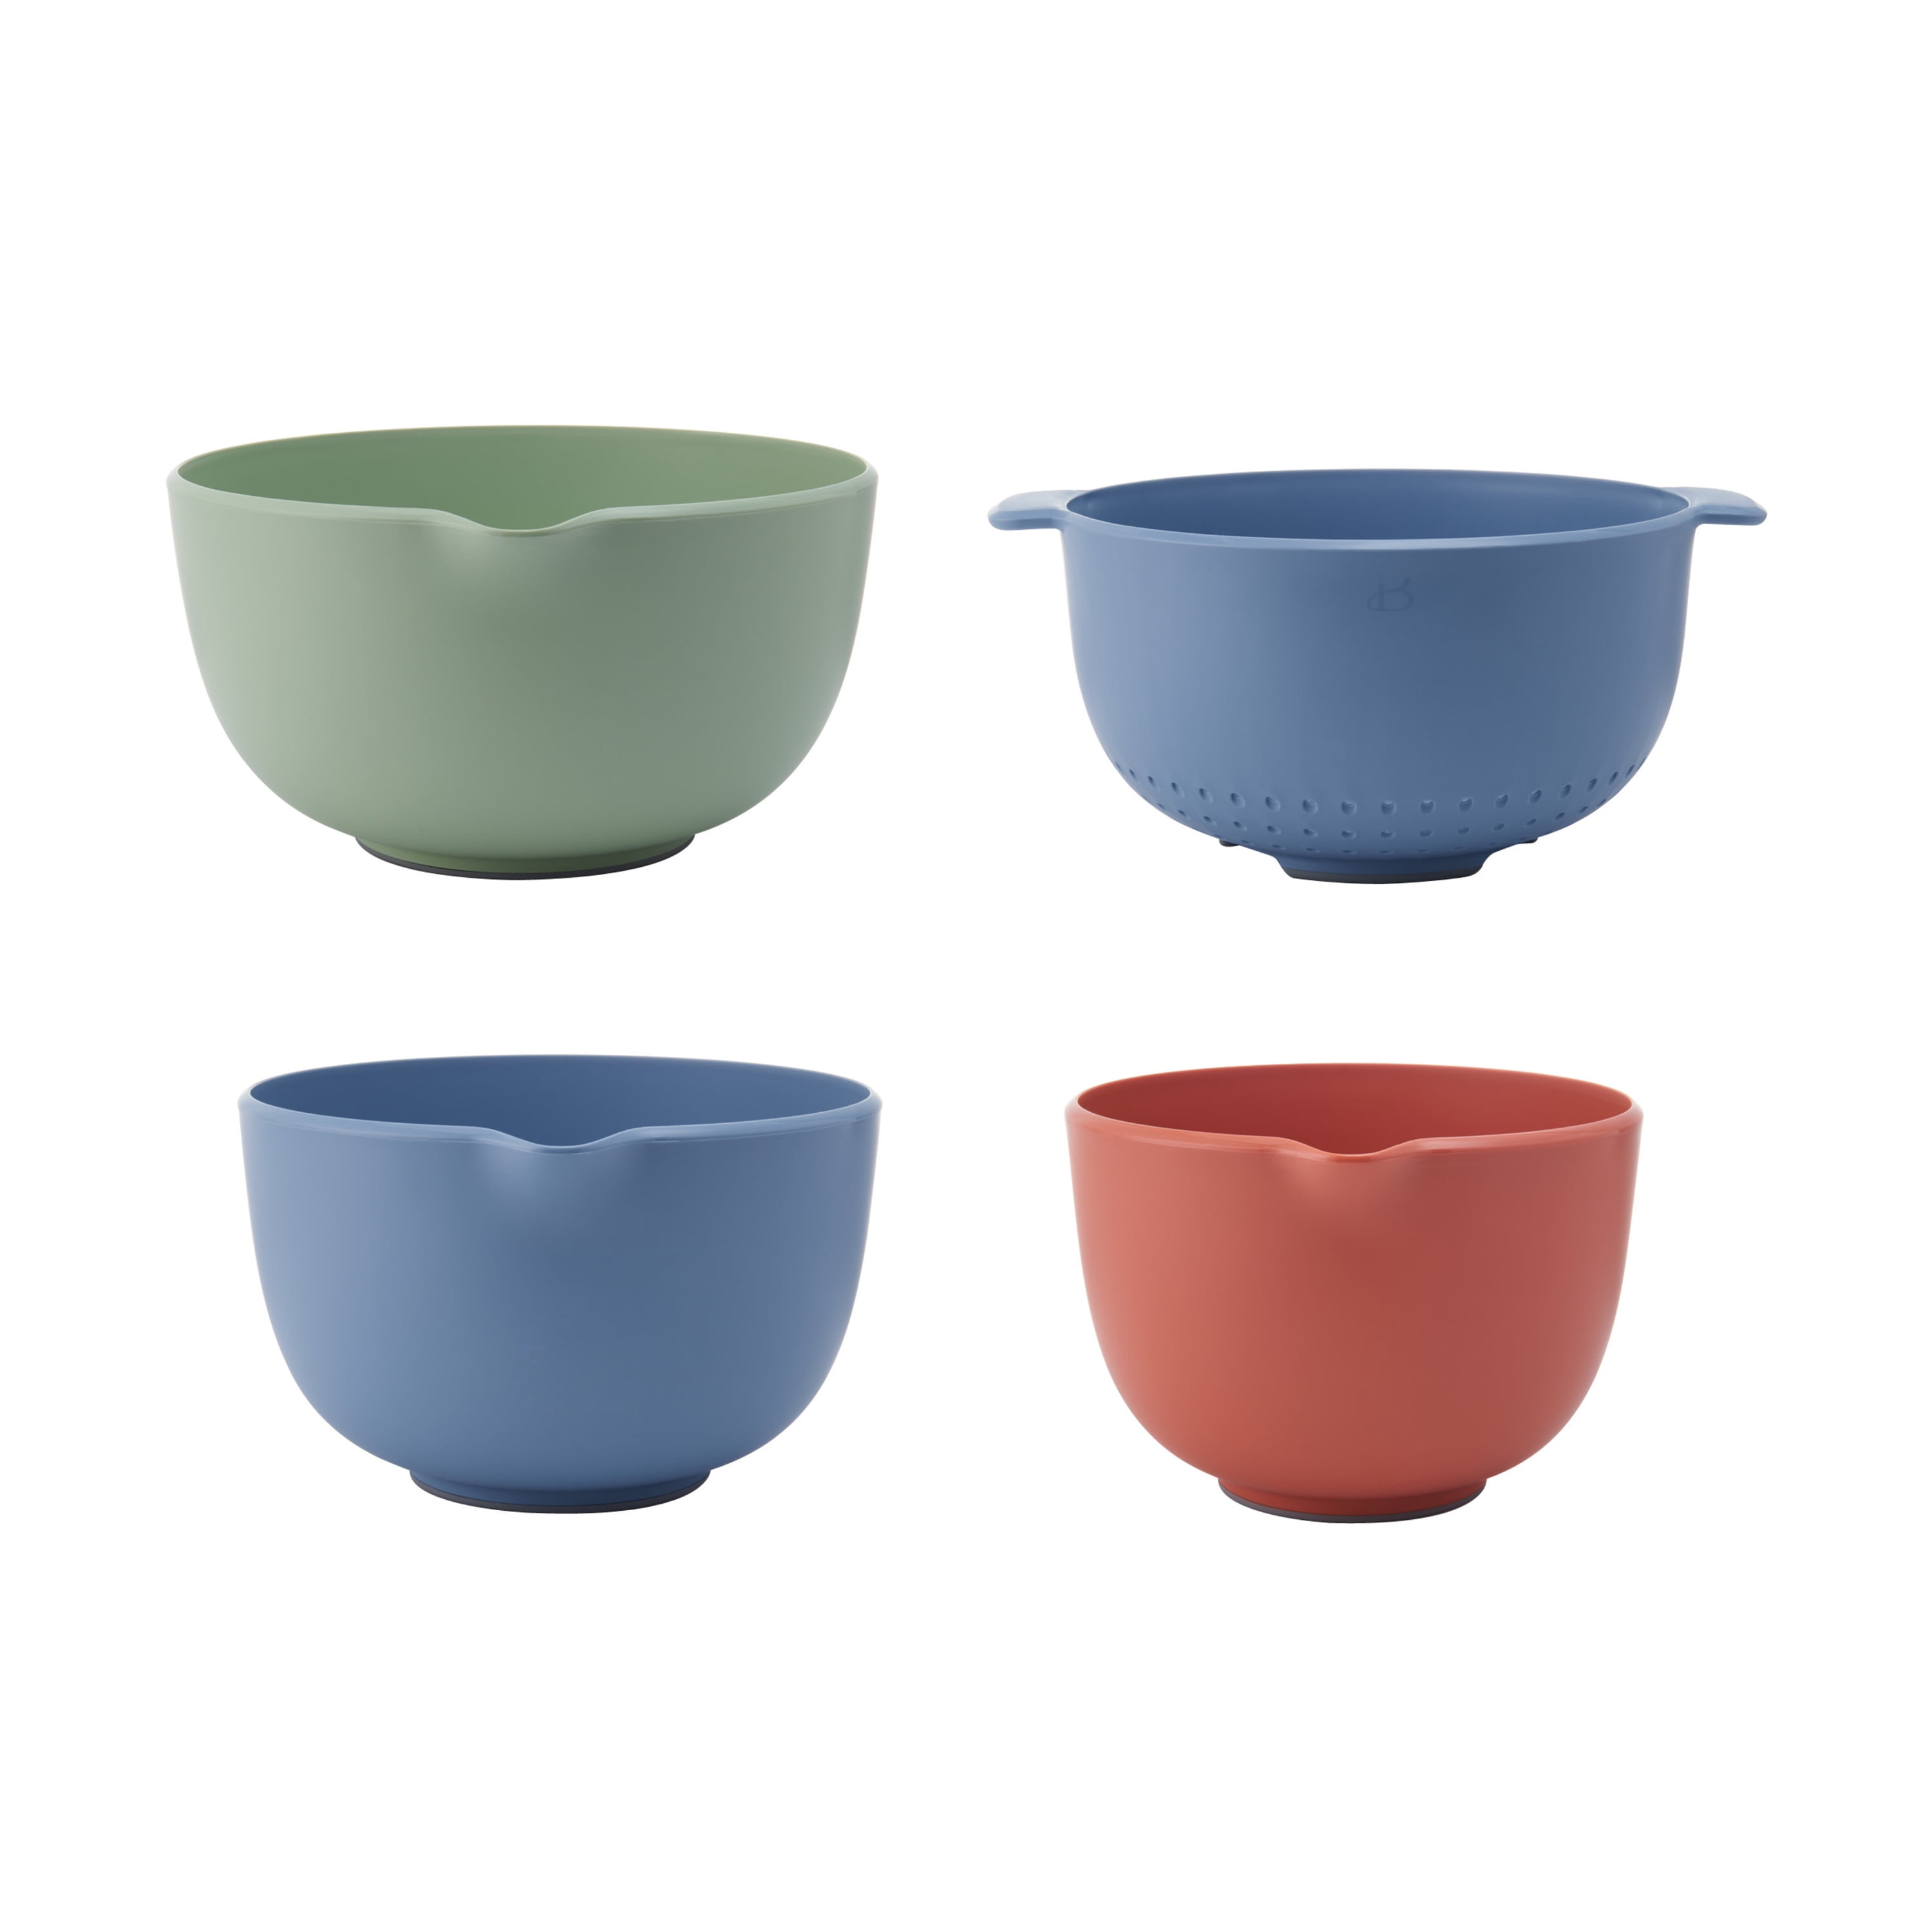 Beautiful Mixing Bowls and Colander Set Sage, Cinnamon and Blue Icing by Drew Barrymore